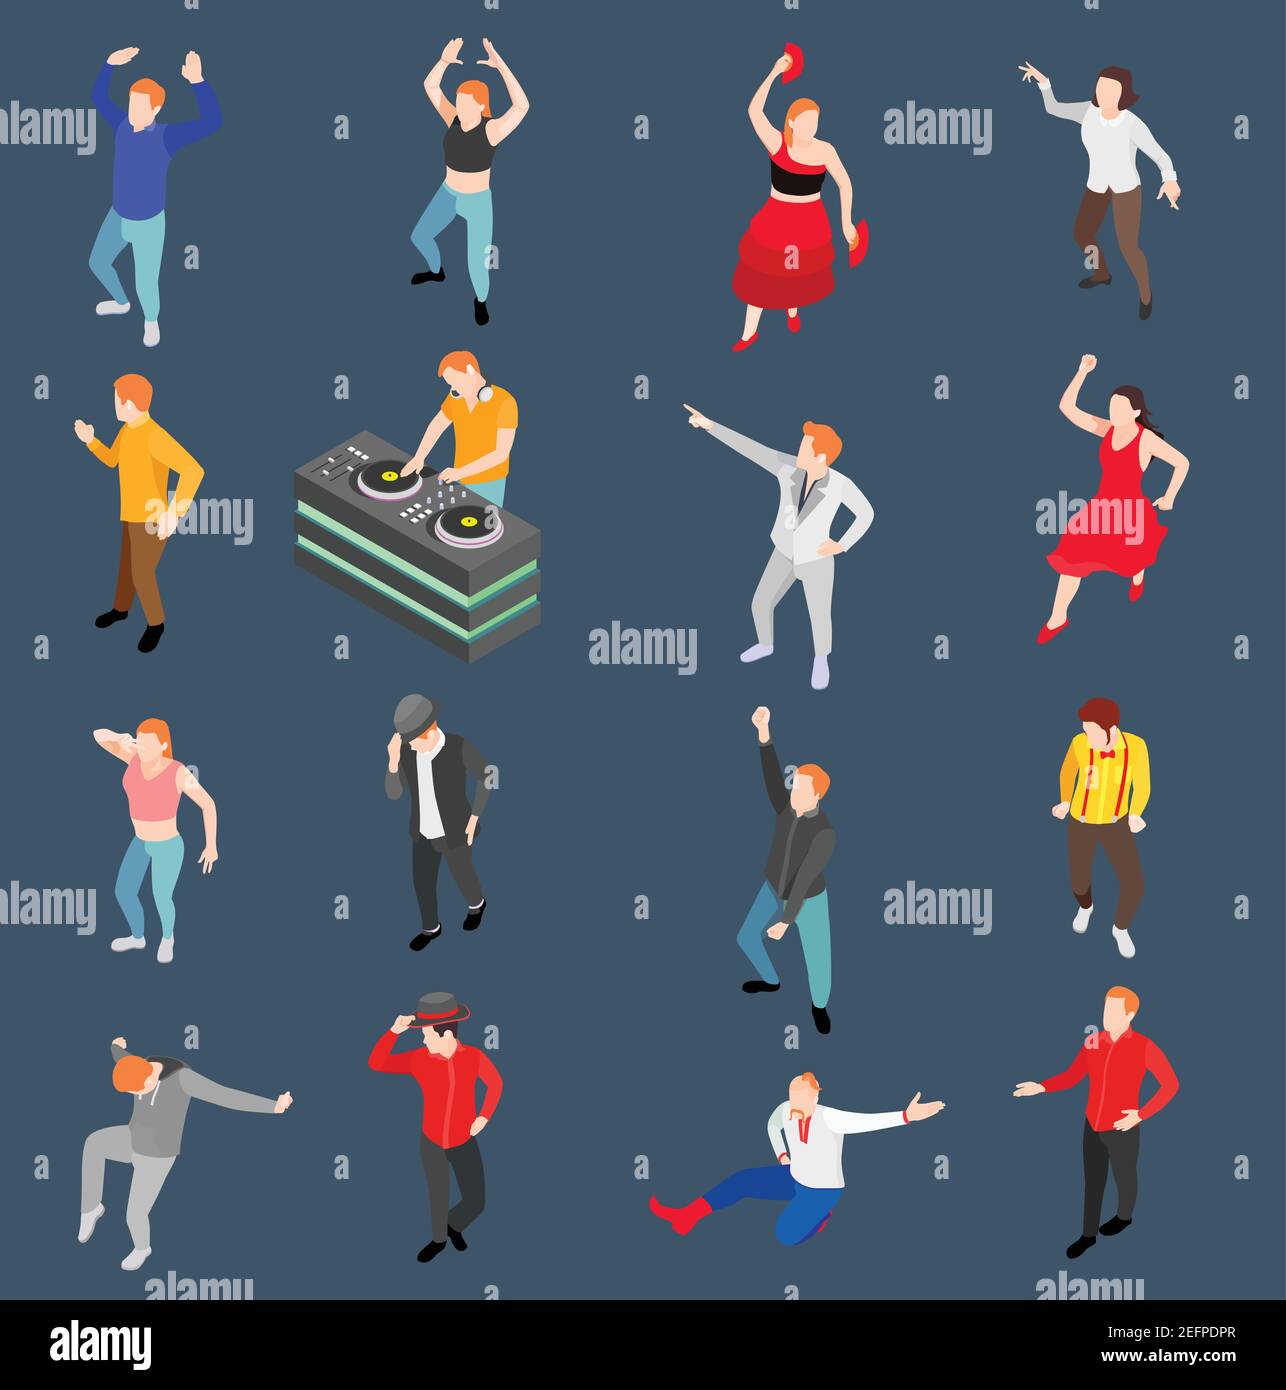 Dance isometric people collection with human characters performing in modern and traditional style with disc jockey vector illustration Stock Vector